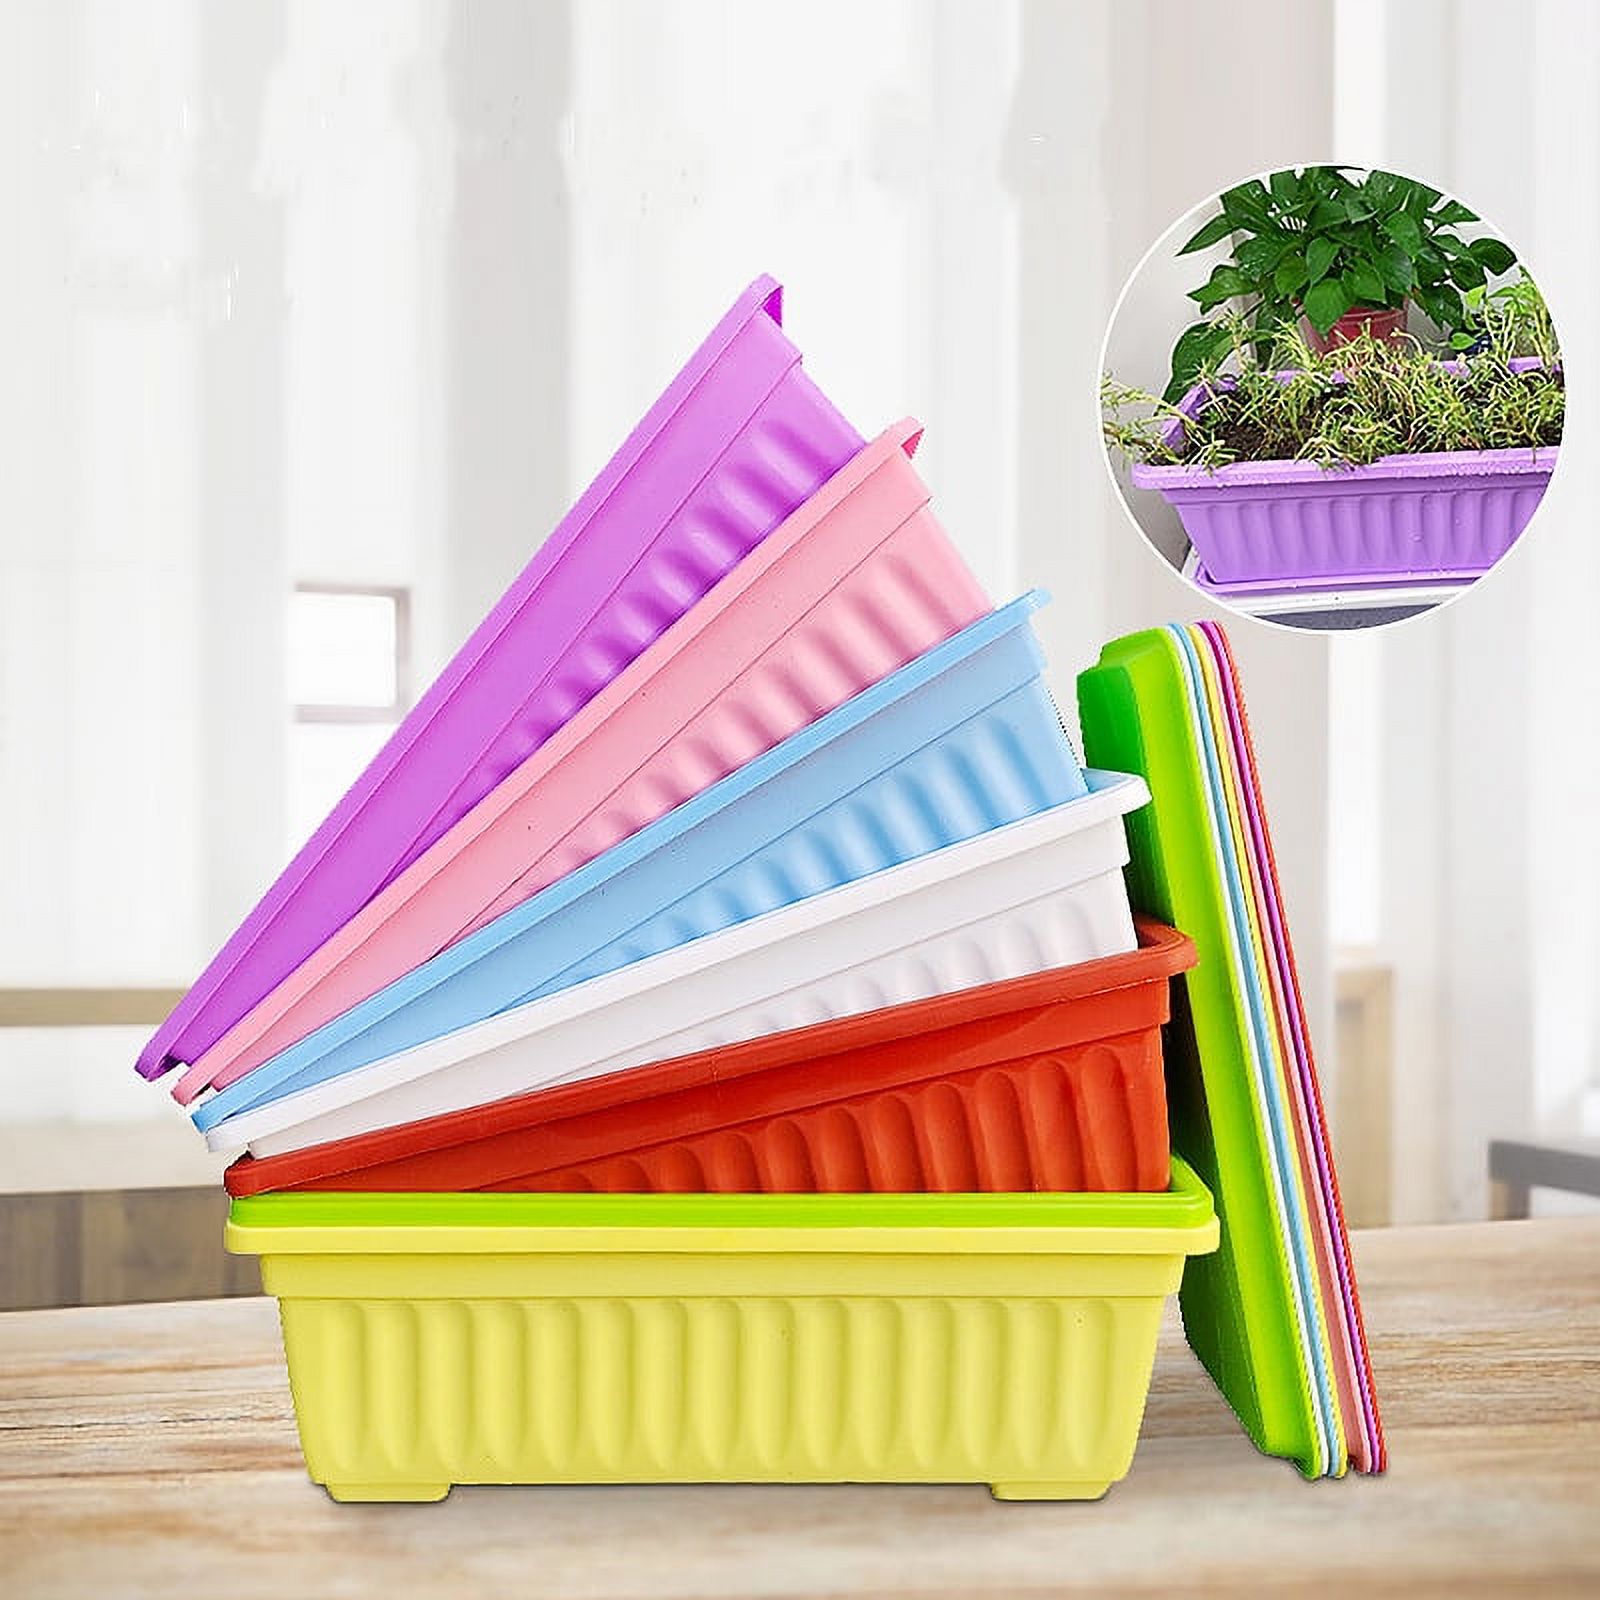 17 Inch Rectangular Plastic Thicken Planters with Trays - Window Planter Box for Outdoor and Indoor Herbs, Vegetables, Flowers and Succulent Plants (1 Pack,Pink) - image 4 of 8